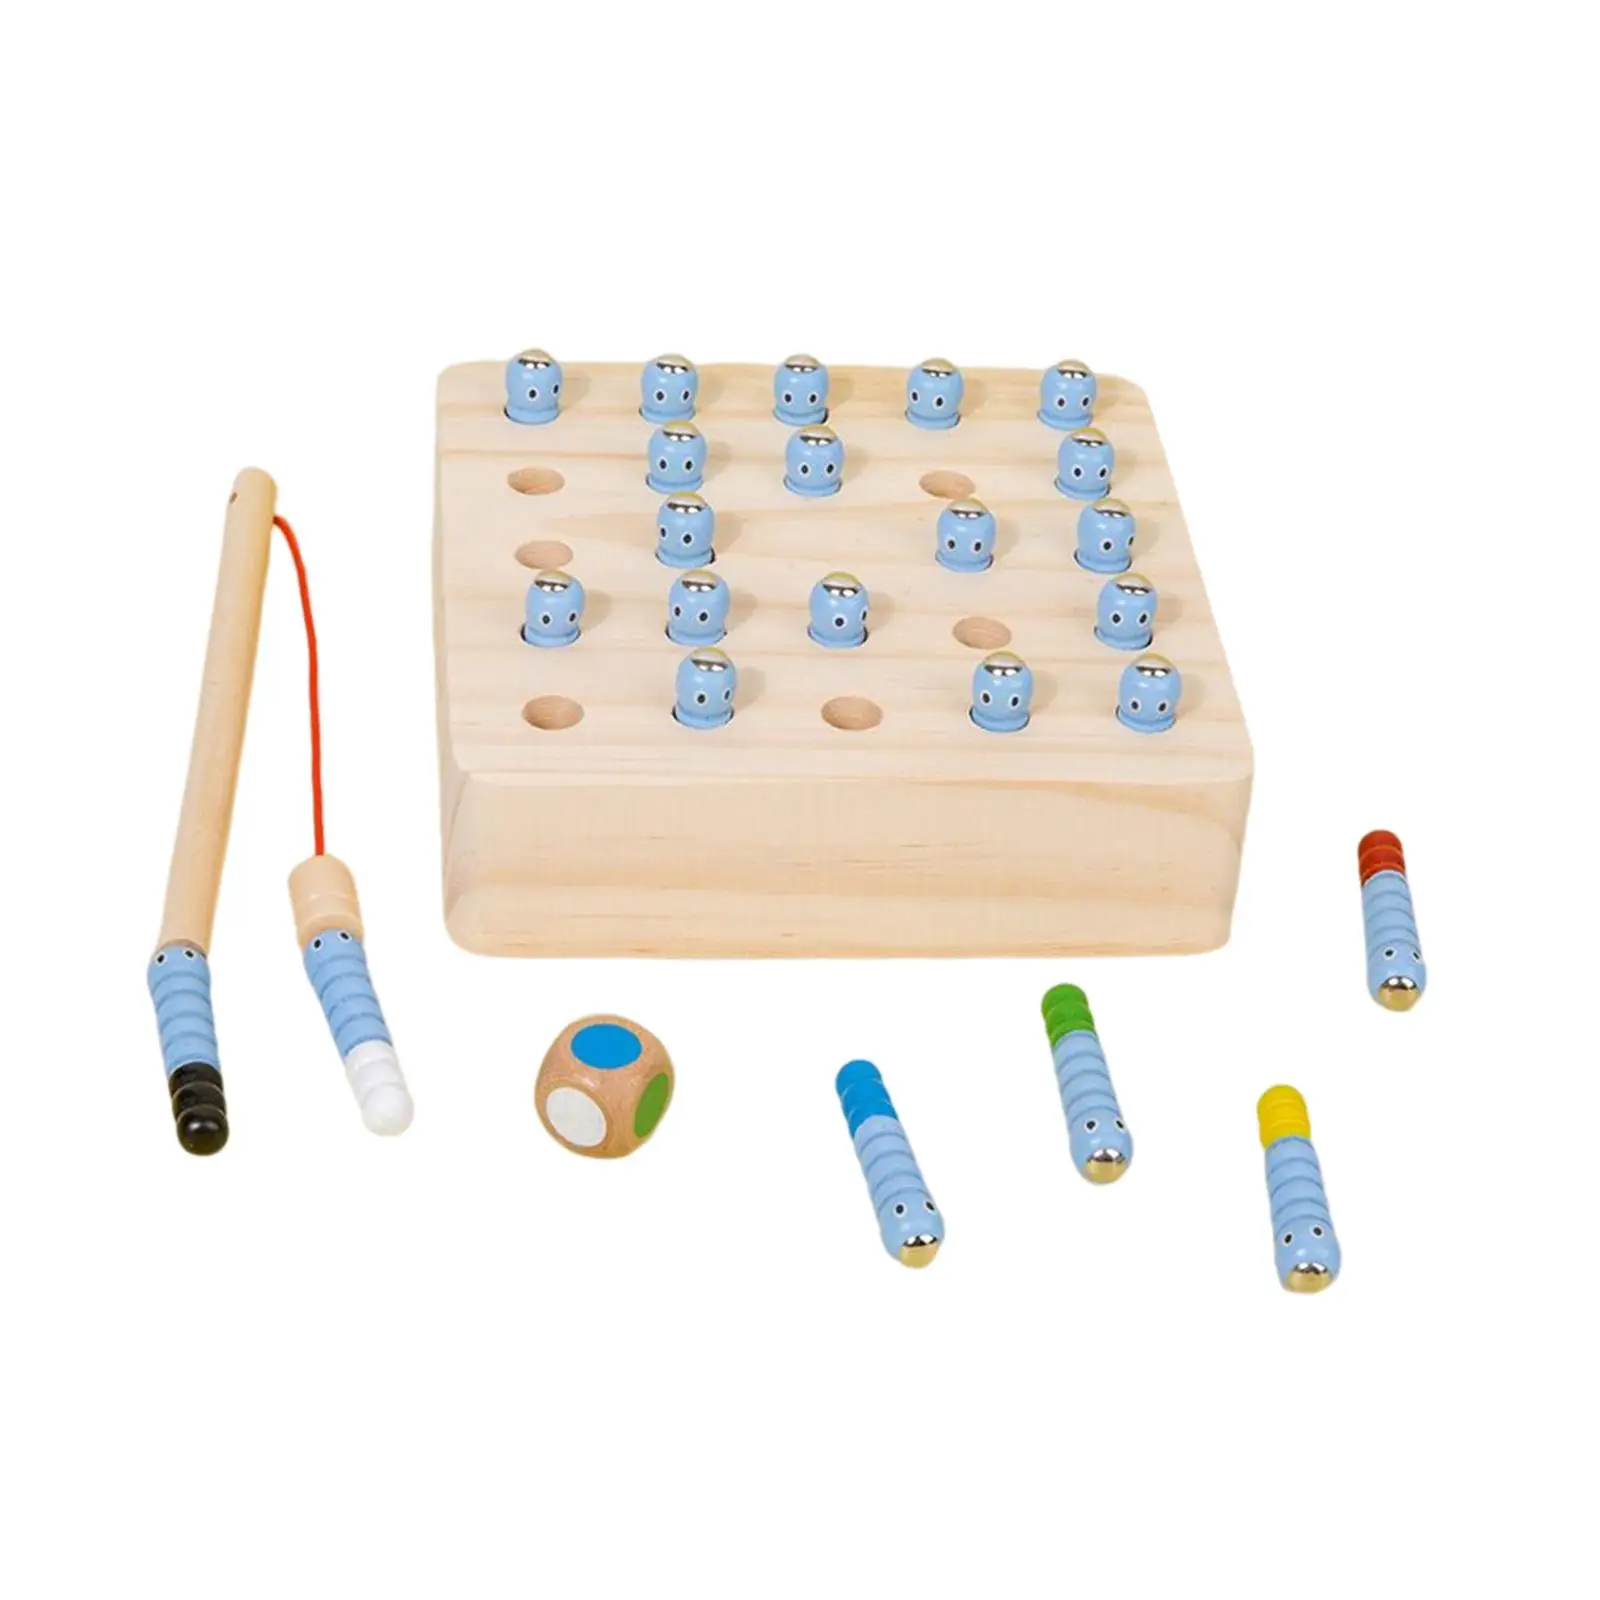 Wooden Fishing Game Toy Memory Training Development Sorting Board Game Busy Board Wood Montessori Catching Worm for Children